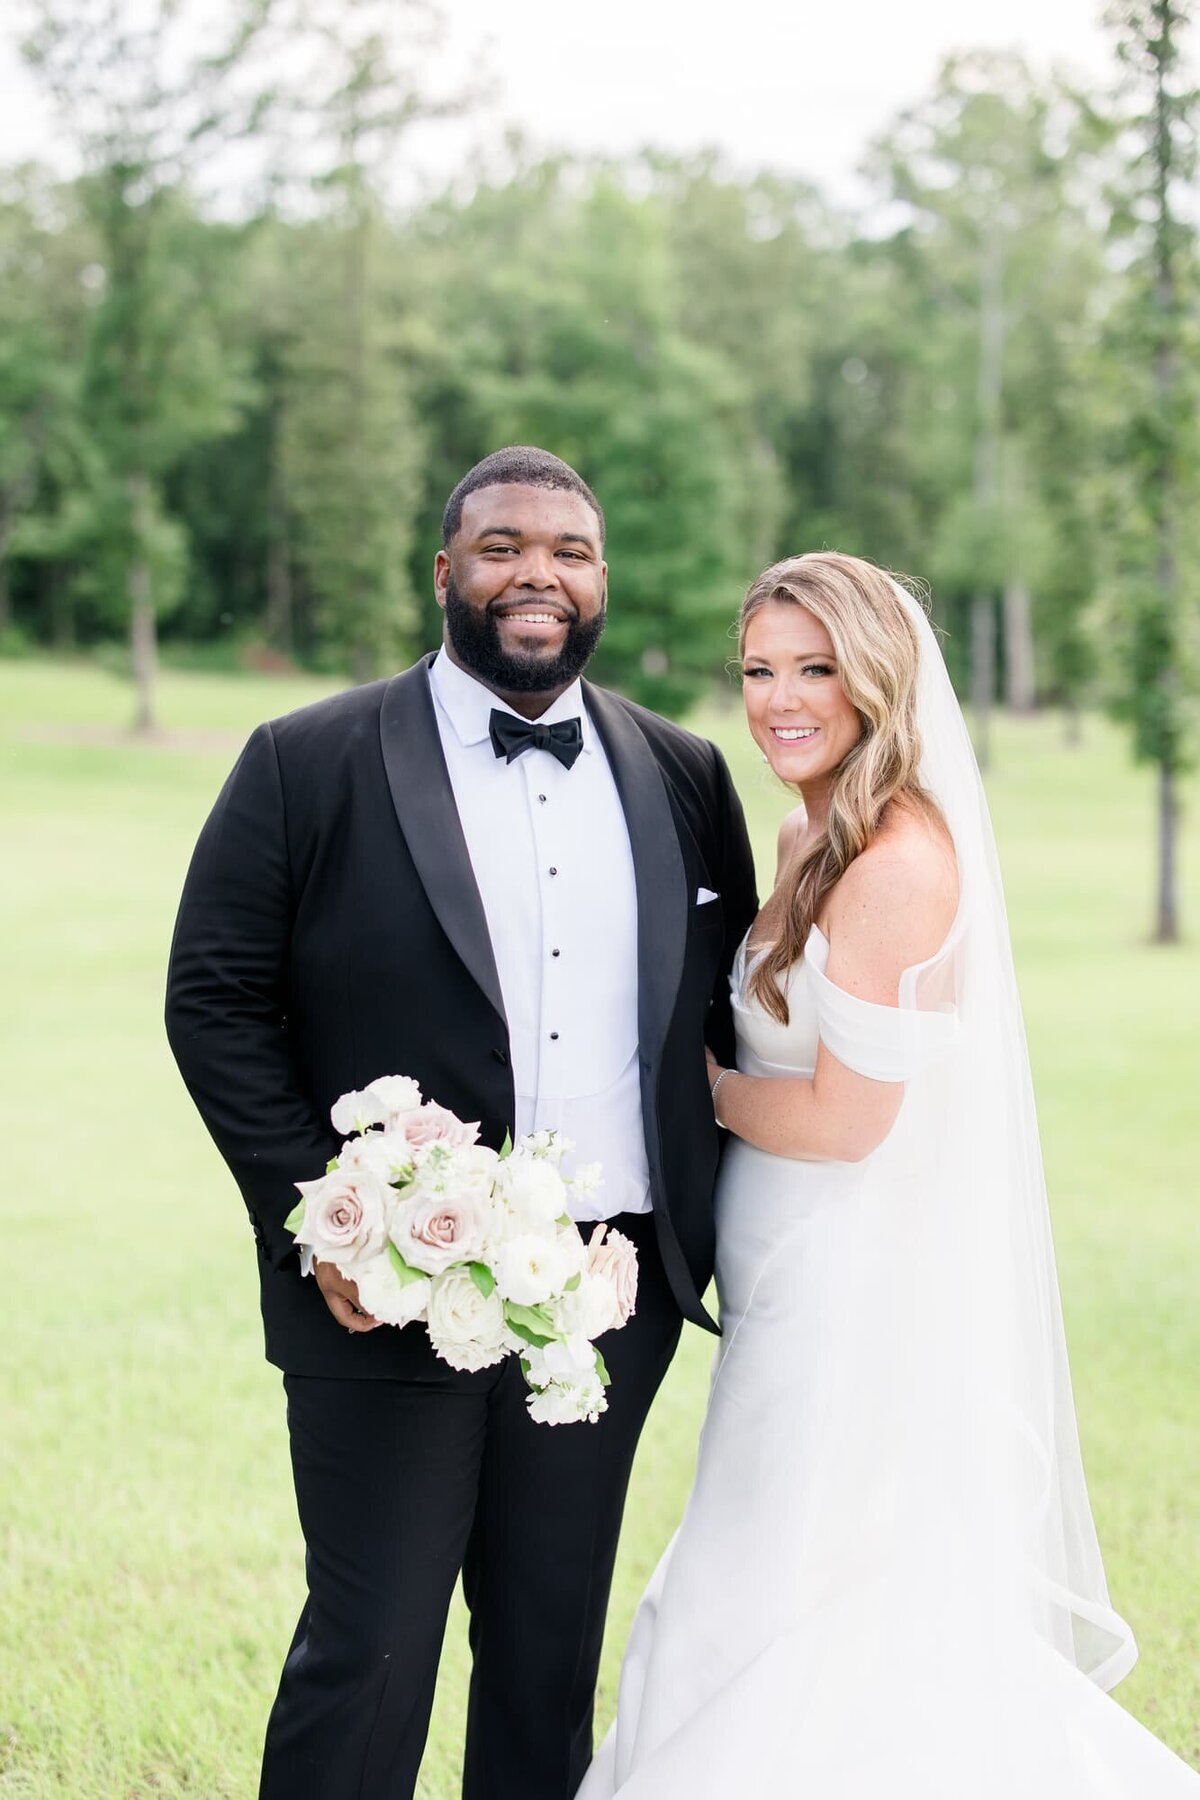 Katie and Alec Wedding Photography Wedding Videography Birmingham, Alabama Husband and Wife Team Photo Video Weddings Engagement Engagements Light Airy Focused on Marriage  Rachel + Eric's Oak Meado_aXFt